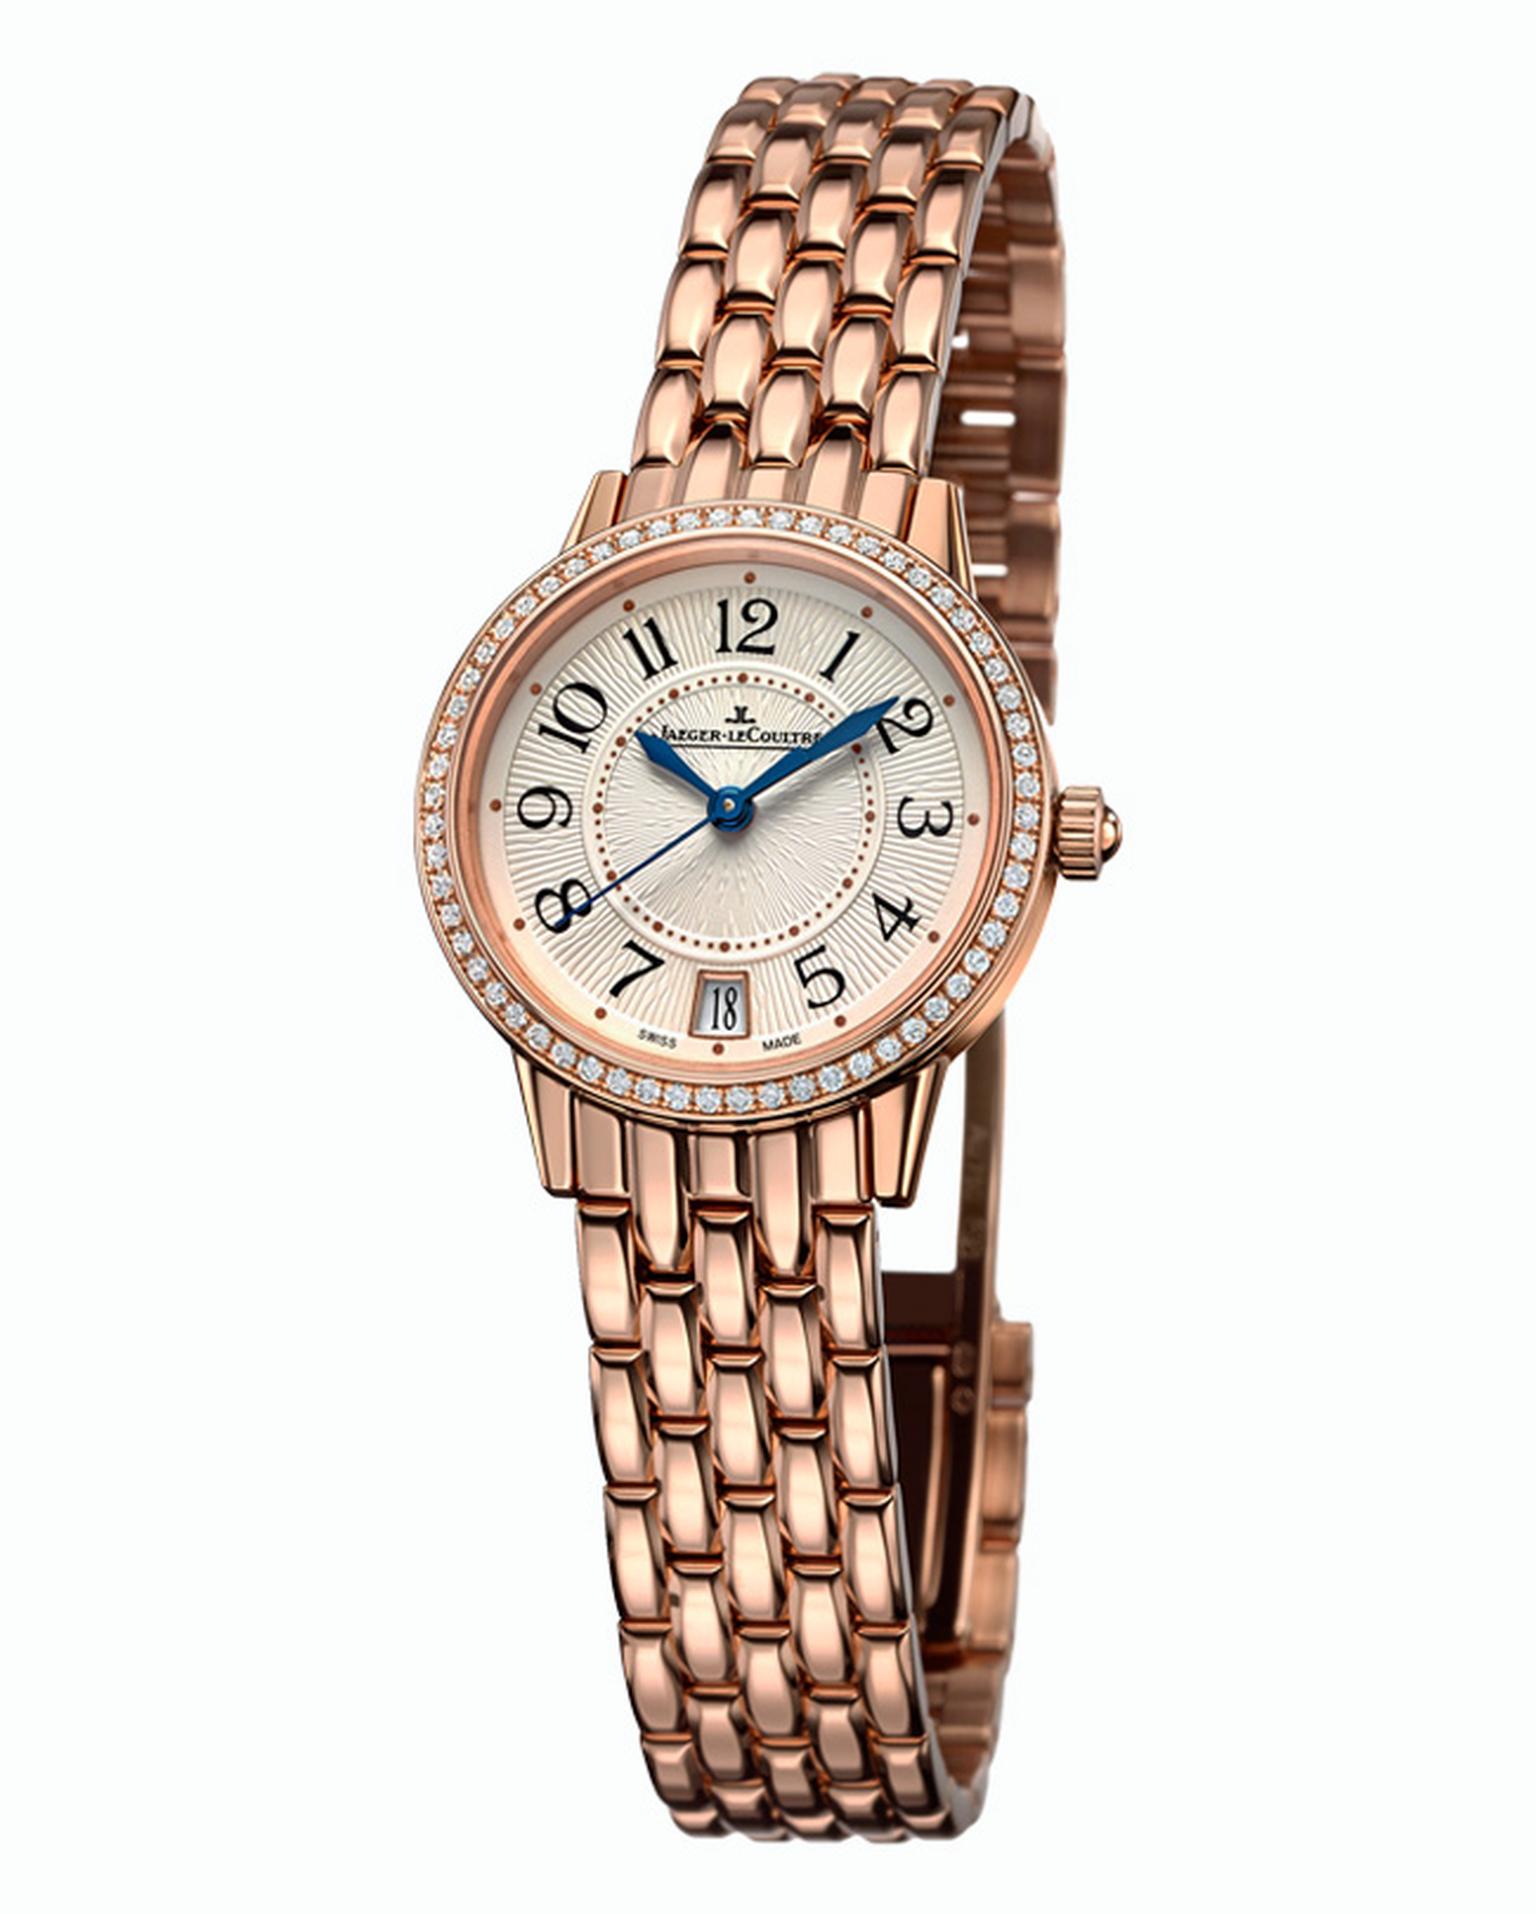 Jaeger-LeCoultre Rendez Vous Date pink gold and diamonds_20140212_Main